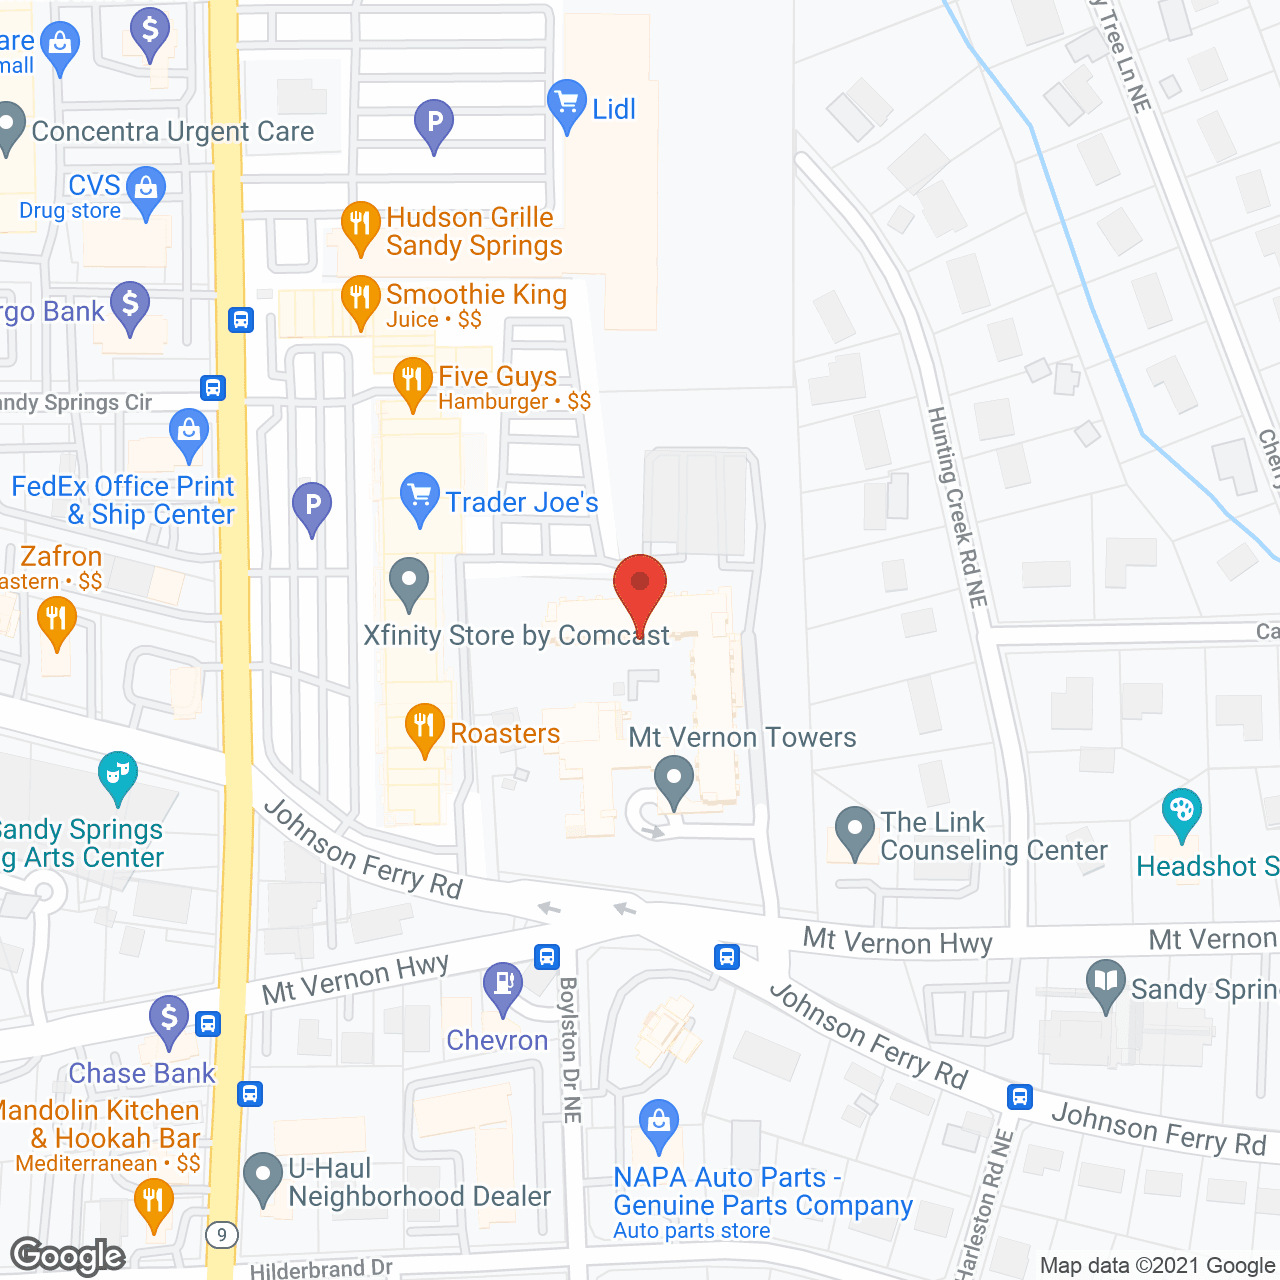 Mount Vernon Towers Personal Care Center in google map